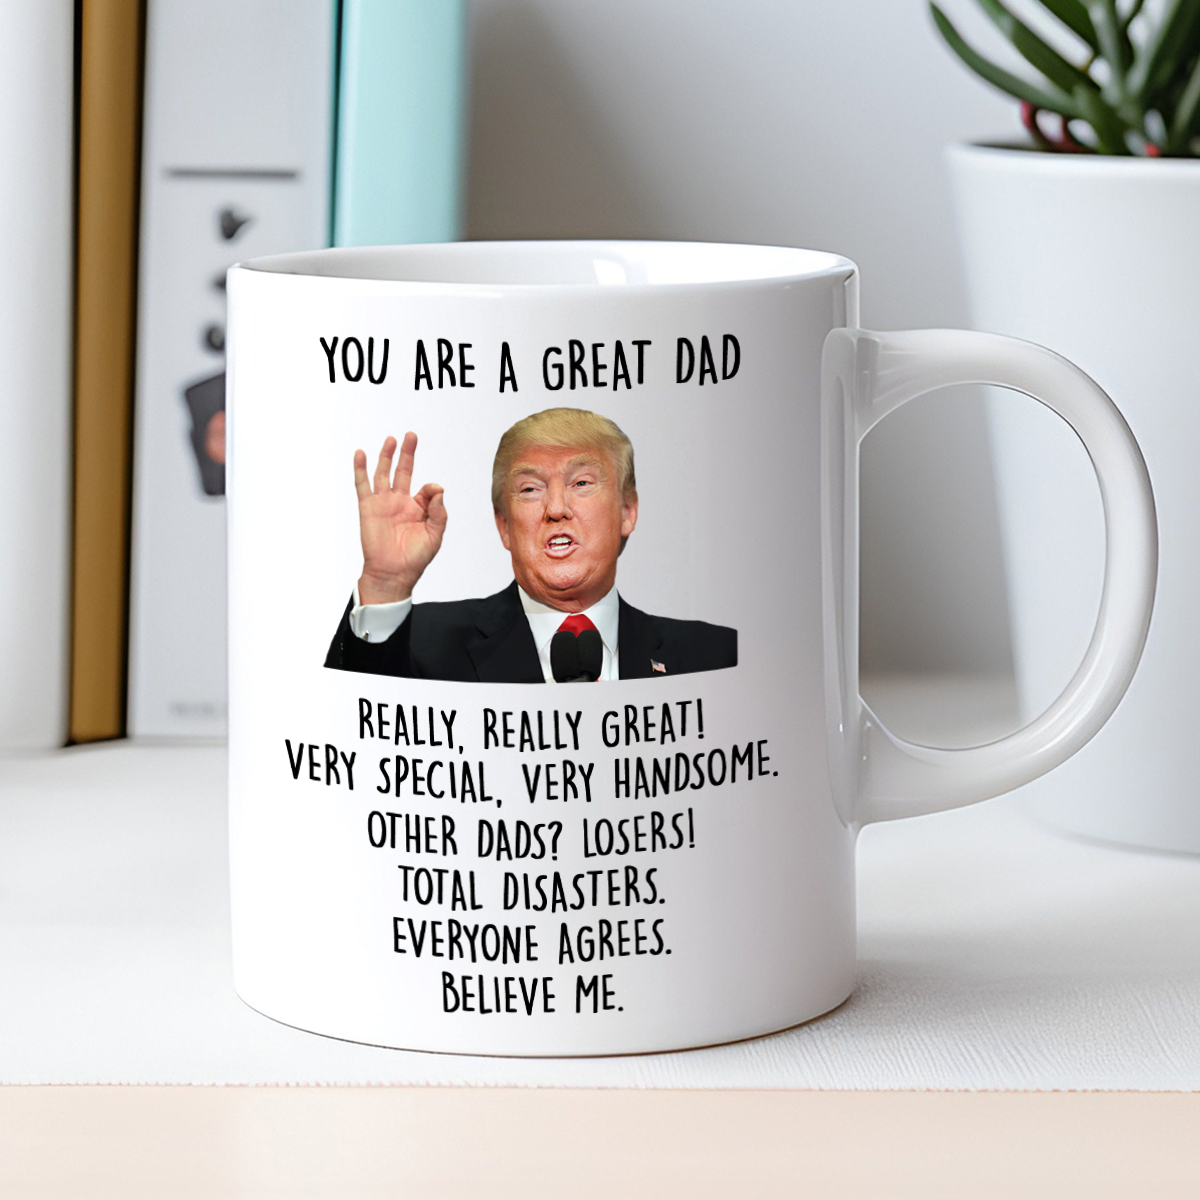 You're A Great Dad Coffee Mug, Dad Birthday Gifts, Gag Gifts for Dad - GB-M11